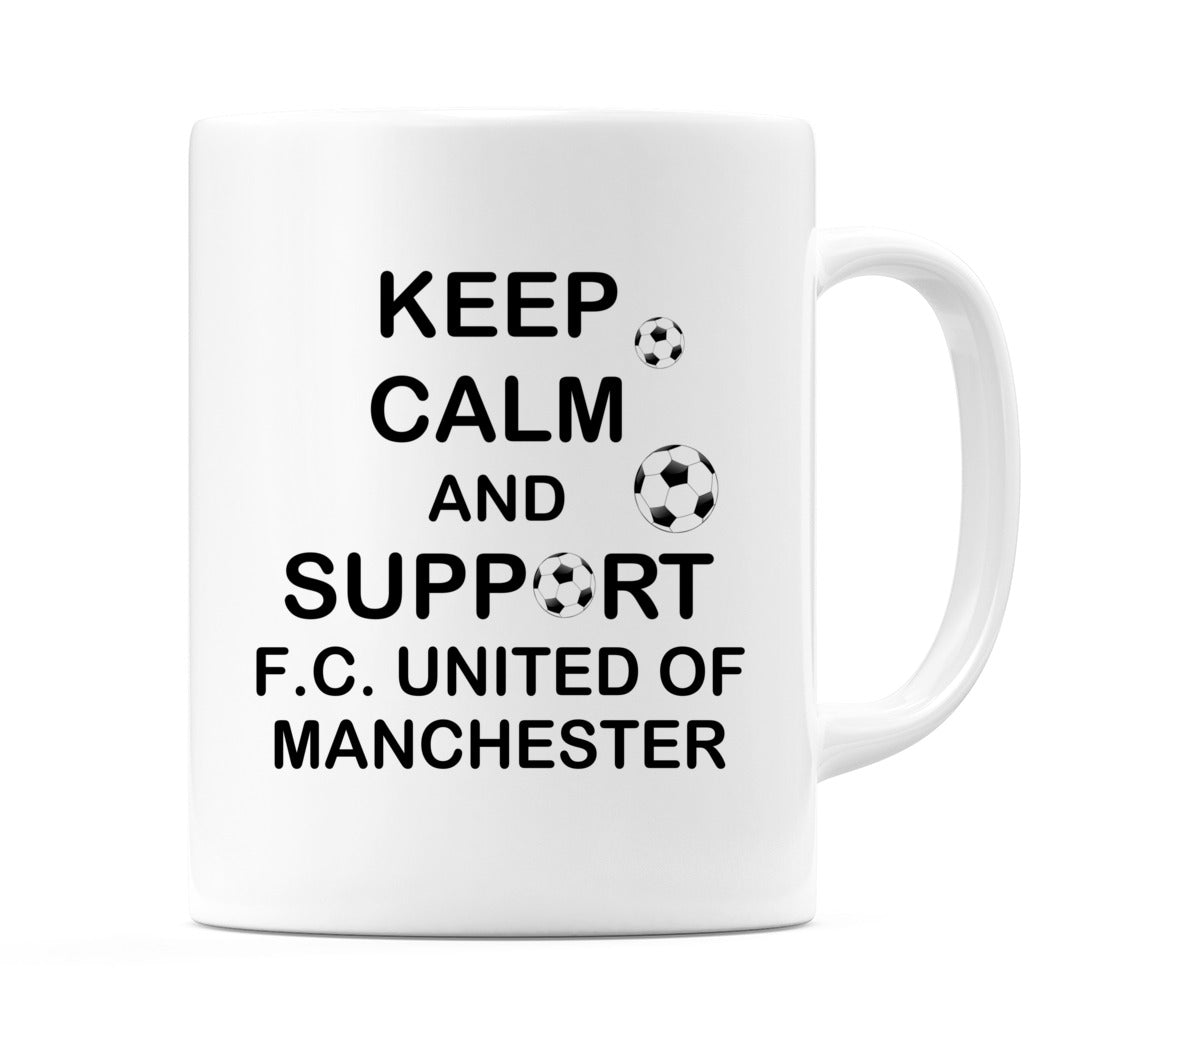 Keep Calm And Support F.C. United of Manchester Mug